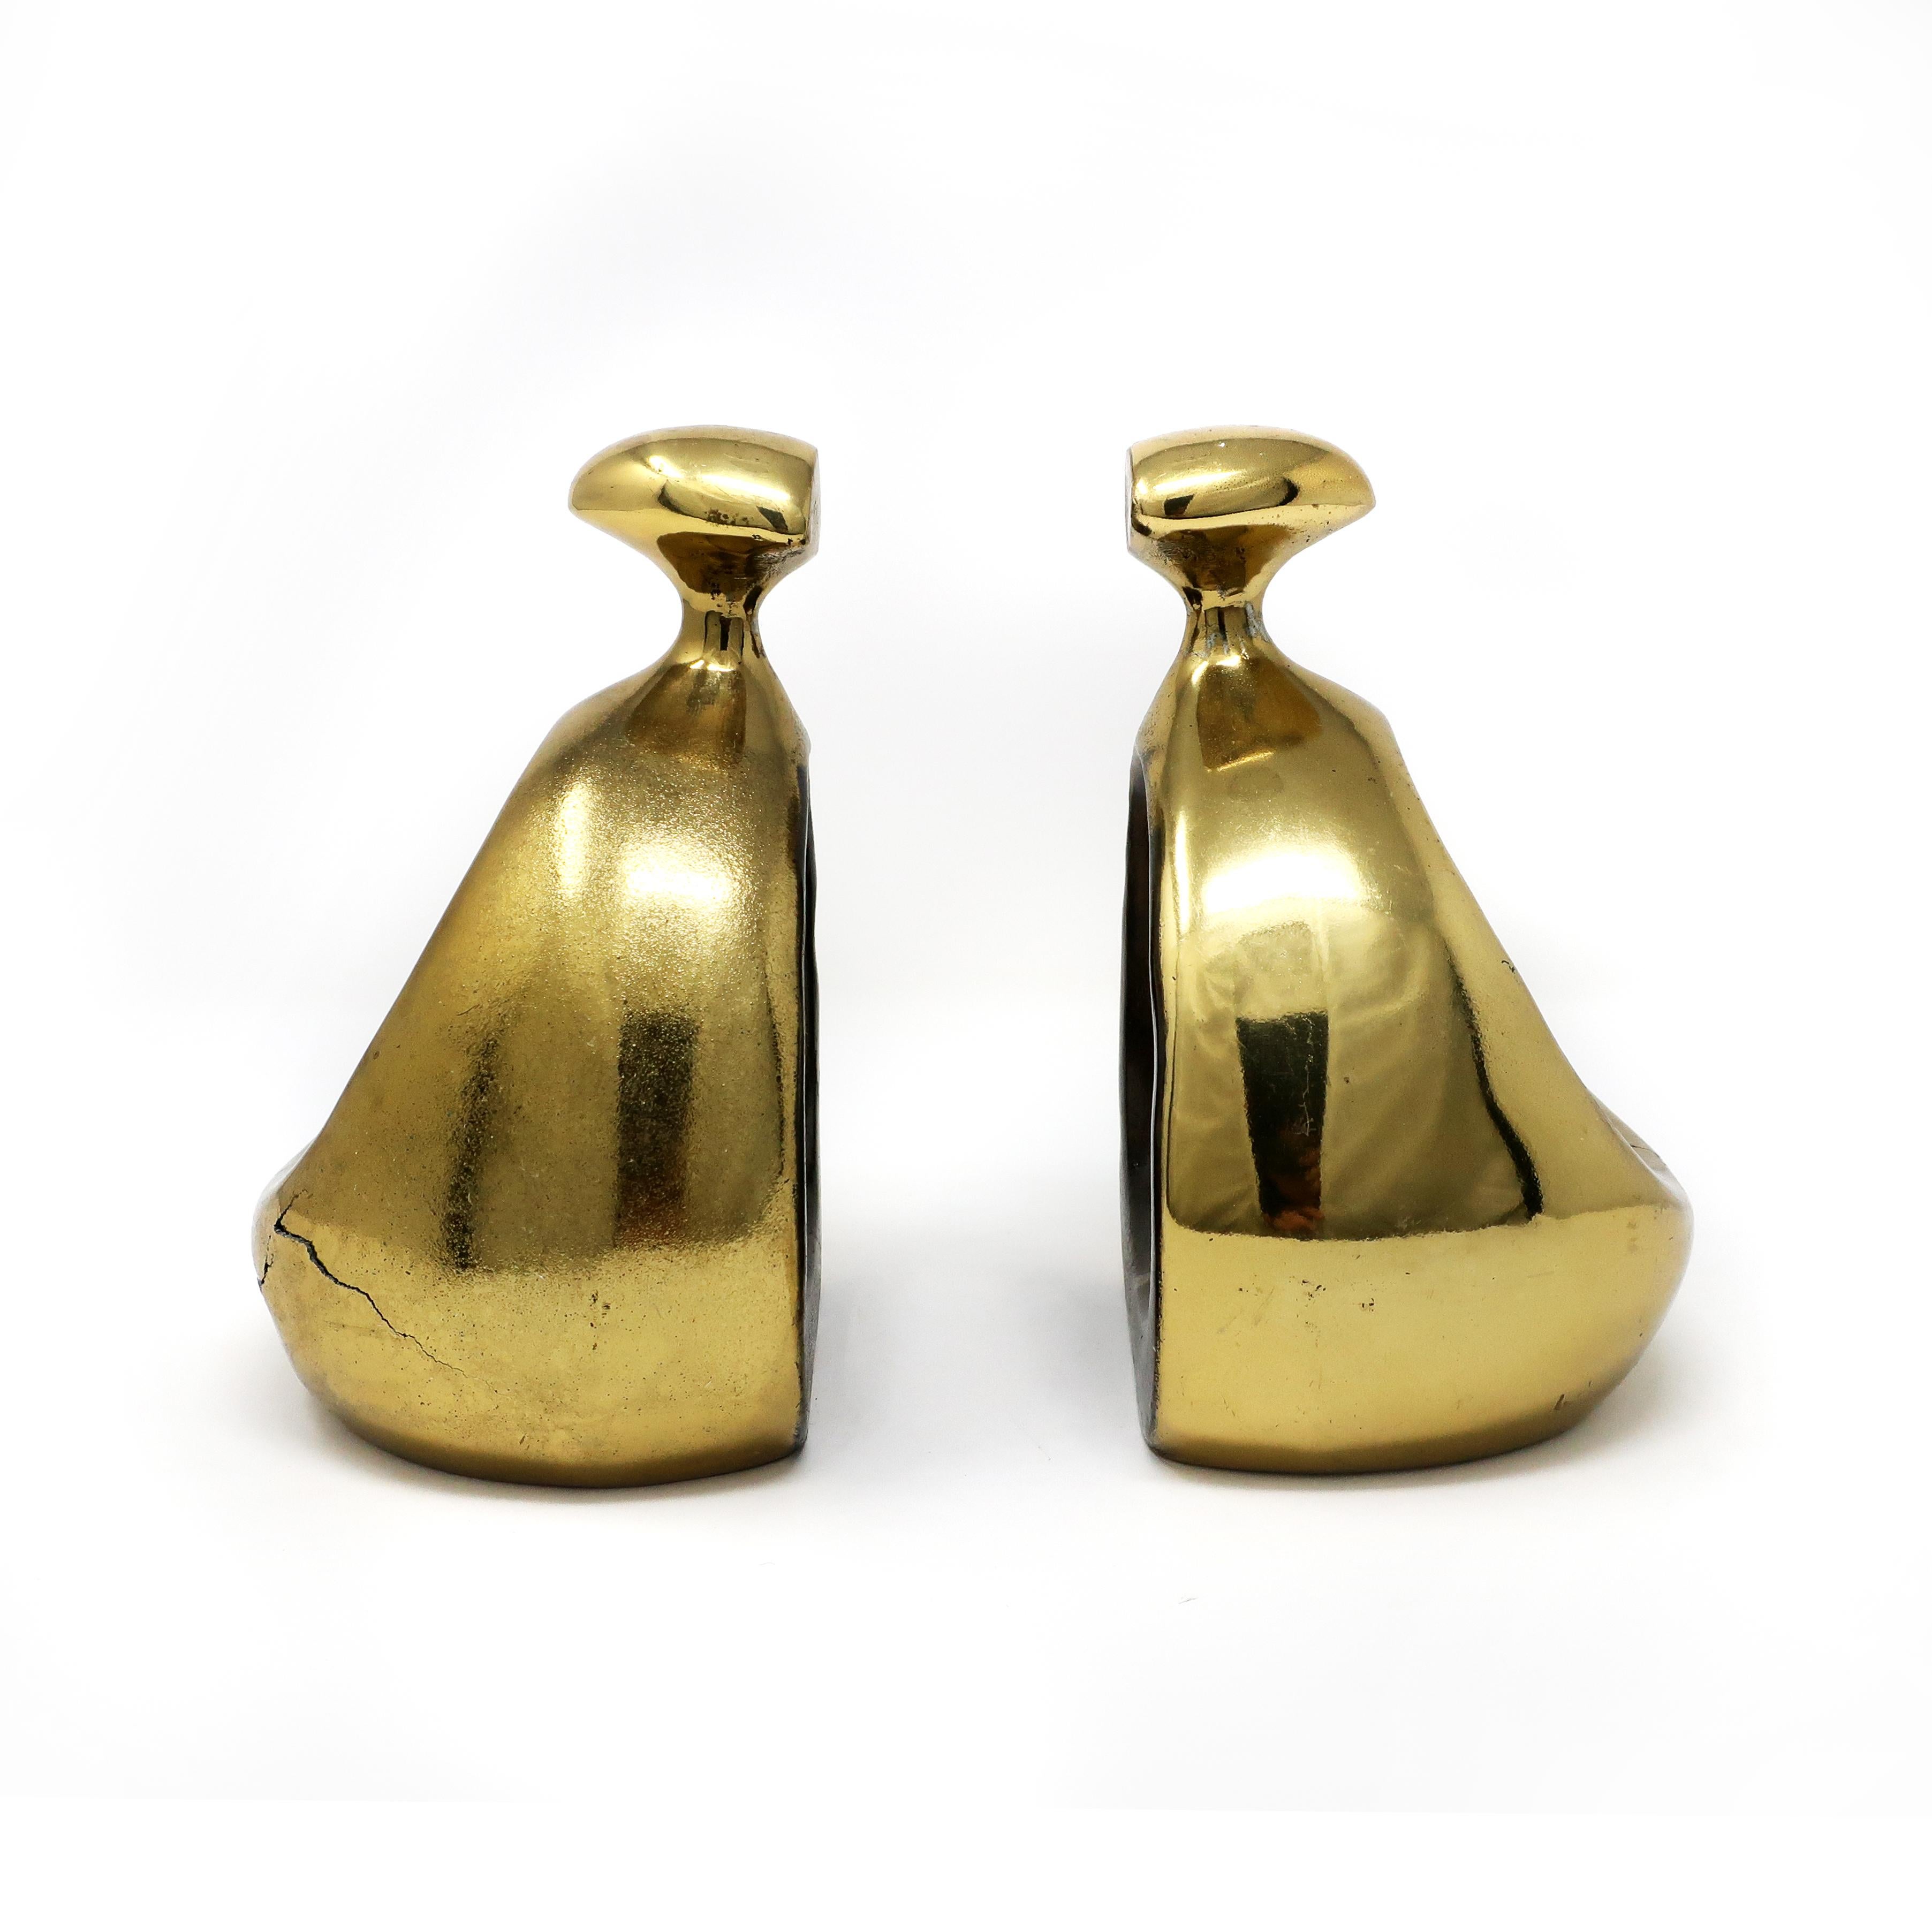 A stylish pair of brass “stirrup” bookends by Ben Seibel for Jenfred Ware from the 1950s. Each have small cracks that don’t impact their utility. (See photos.)

Measures: 8” x 5” x 7”.